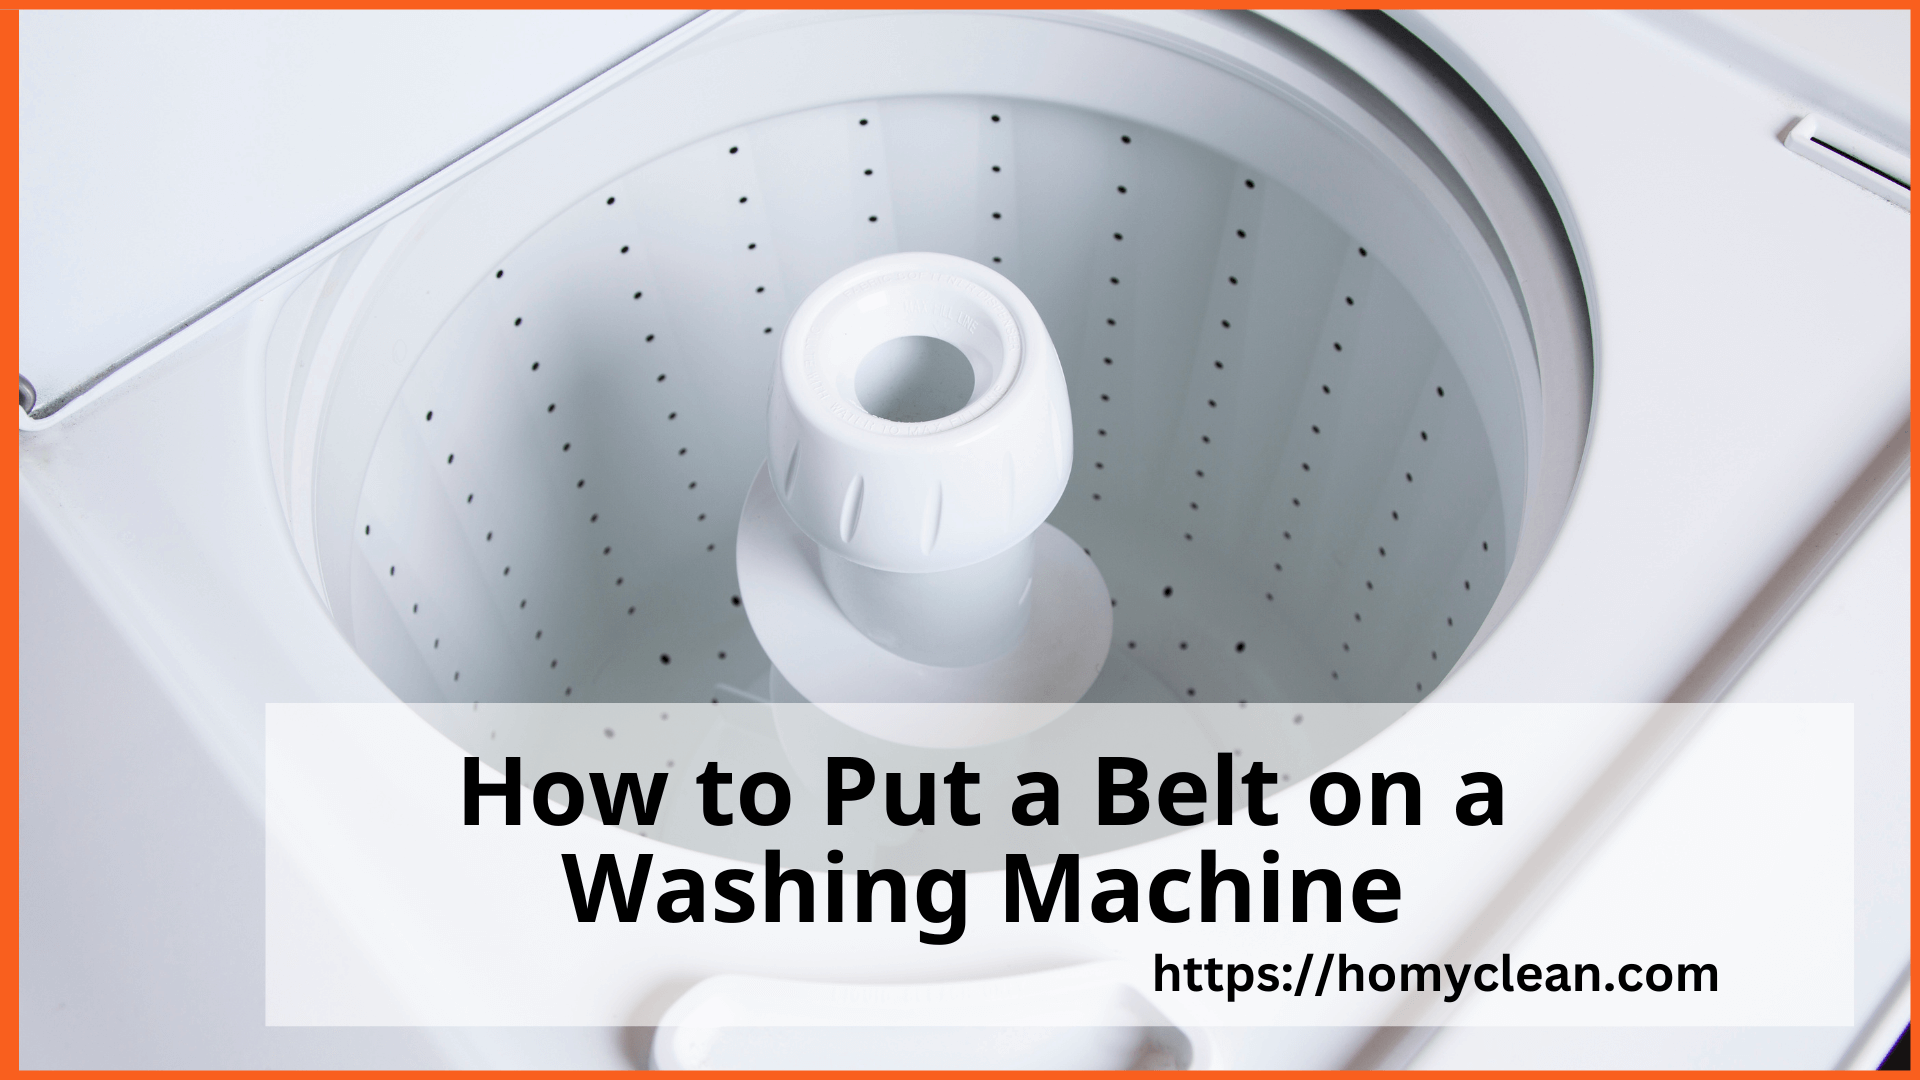 How to Put a Belt on a Washing Machine